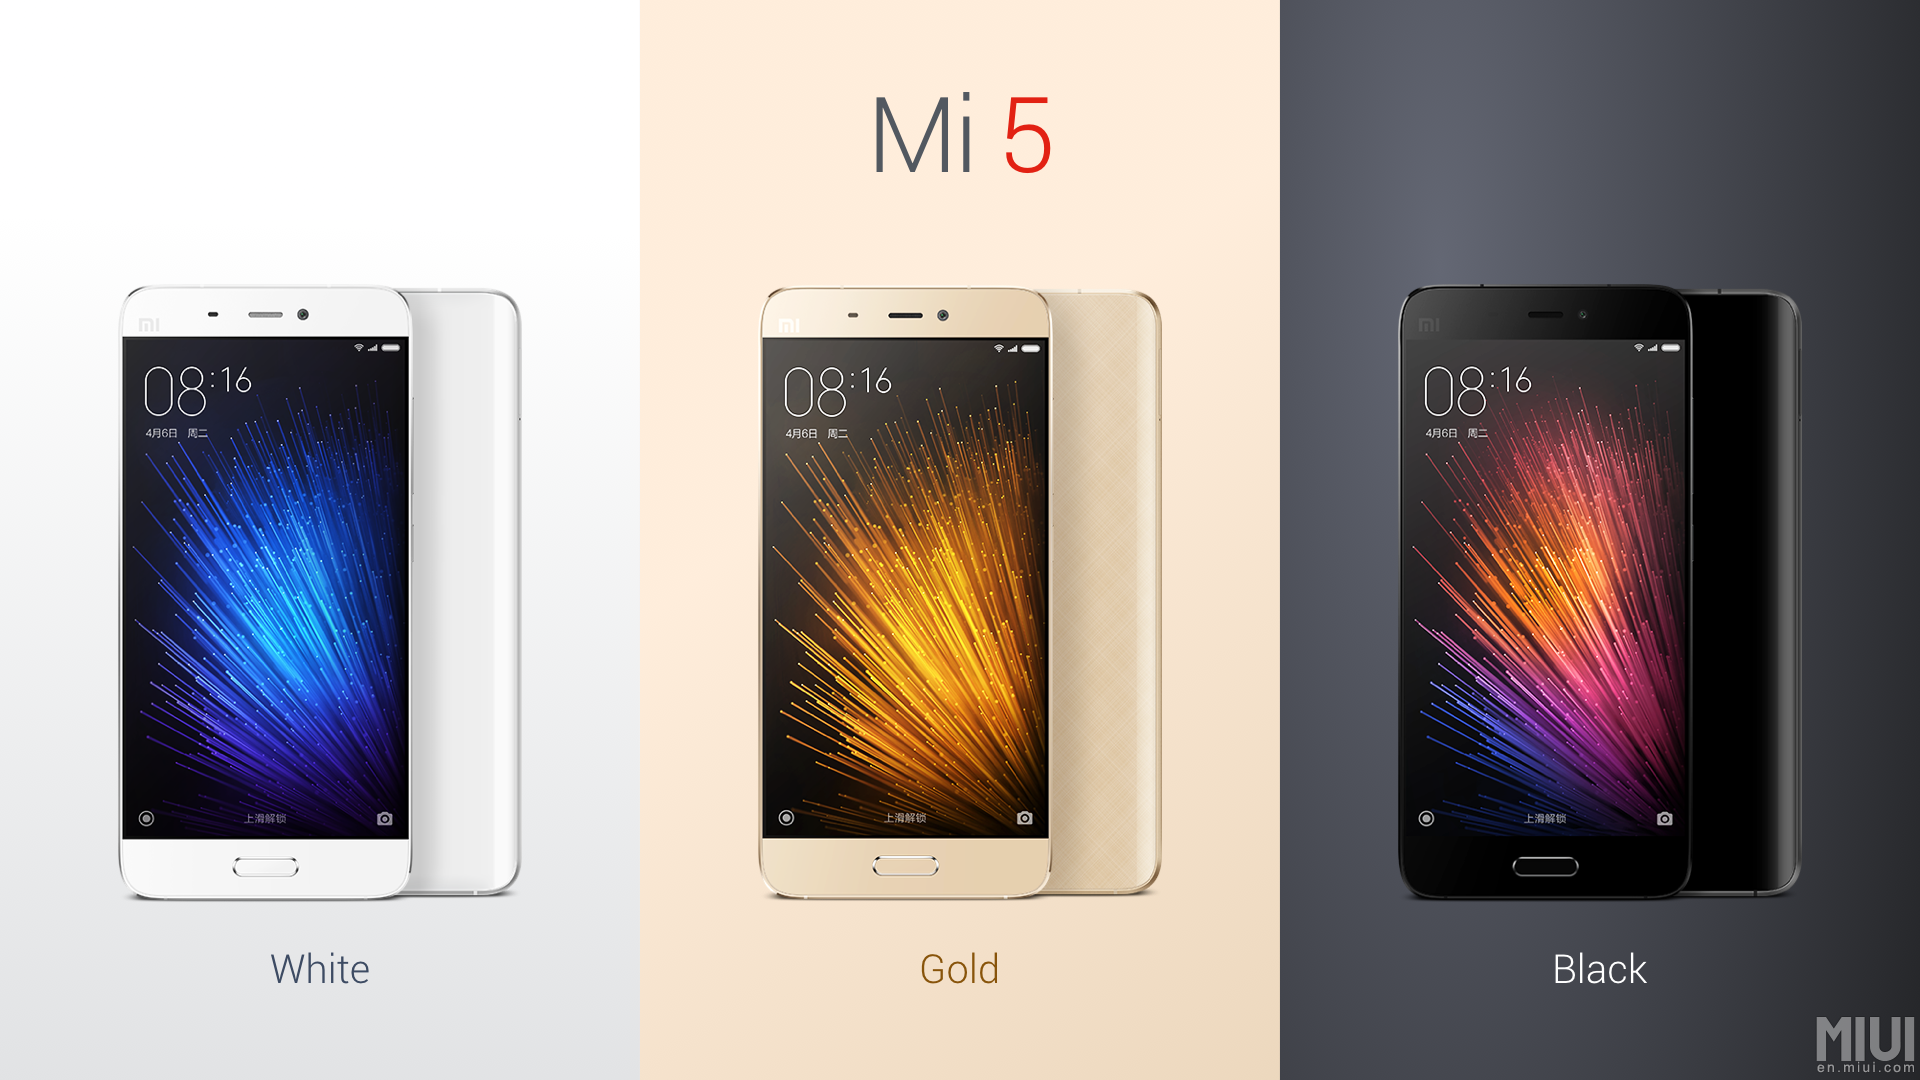 Subjetivo General bobina Hands-On With the Xiaomi Mi5 - High-End at a Mid-Range Price